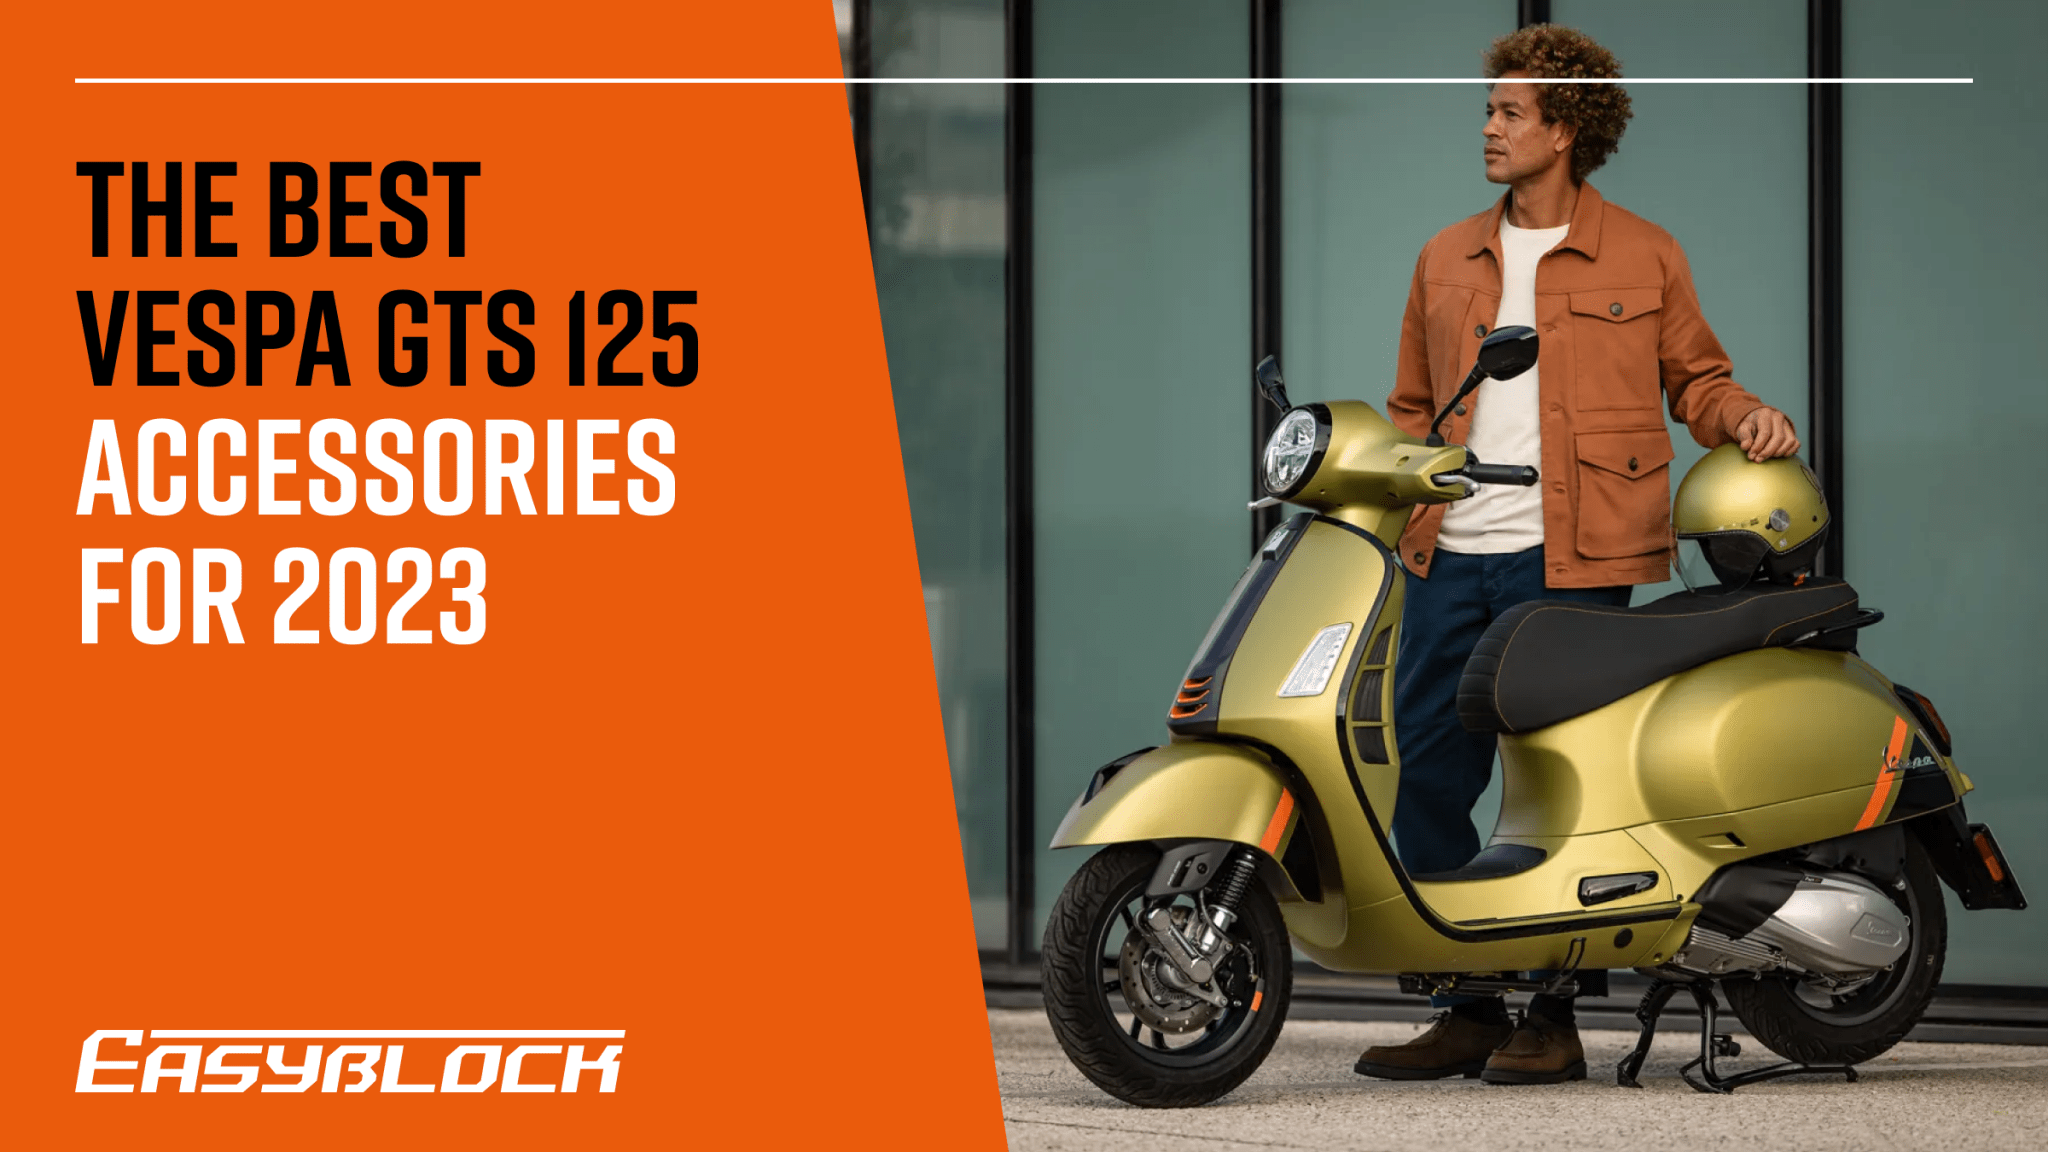 Best Vespa GTS 125 Accessories for 2023